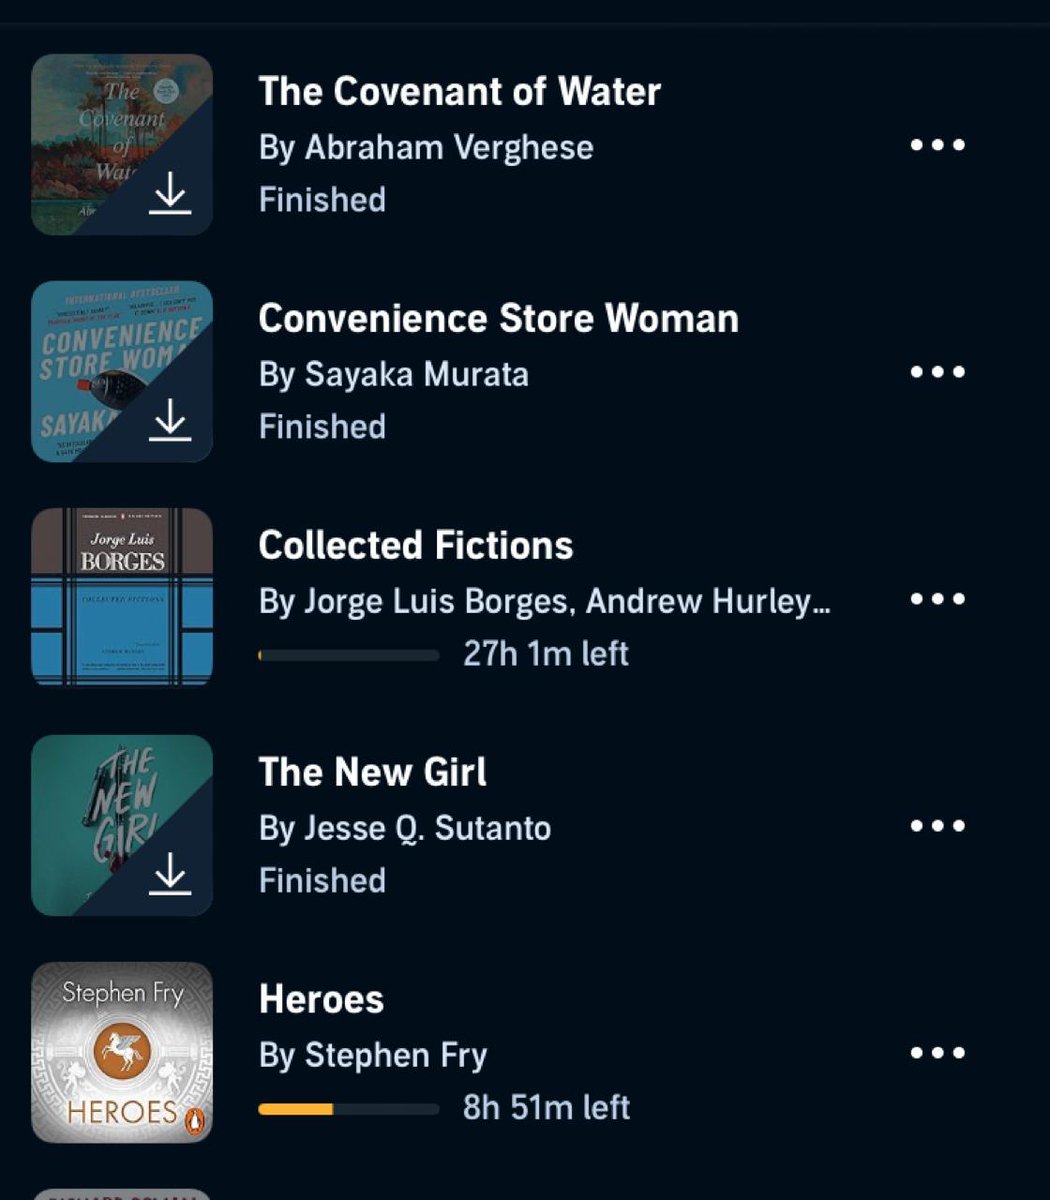 Three @Audible audiobooks that I finished this week - the much-lauded saga #TheCovenantOfWater by Abraham Verghese which I have been savoring for the better part of a year, and two shorter novels - #ConvenienceStoreWoman by Sayaka Murata and #TheNewGirl by Jesse Q. Sutanto 🧵